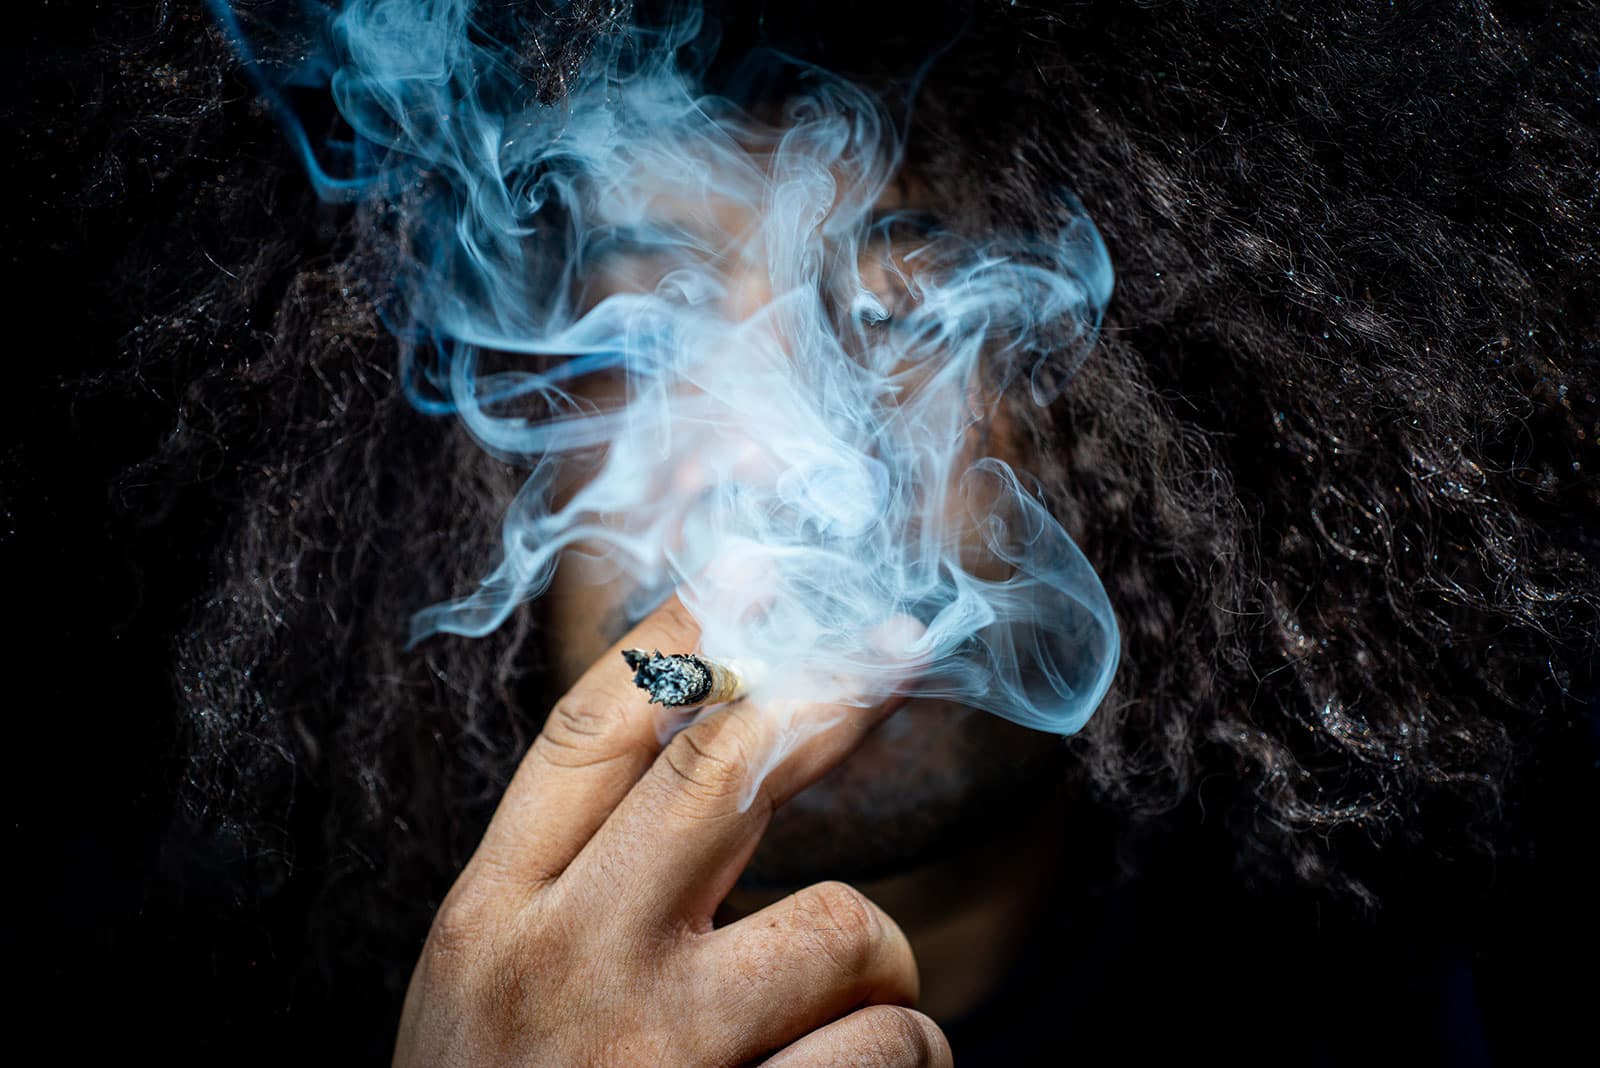 Why is Hotboxing Dangerous?